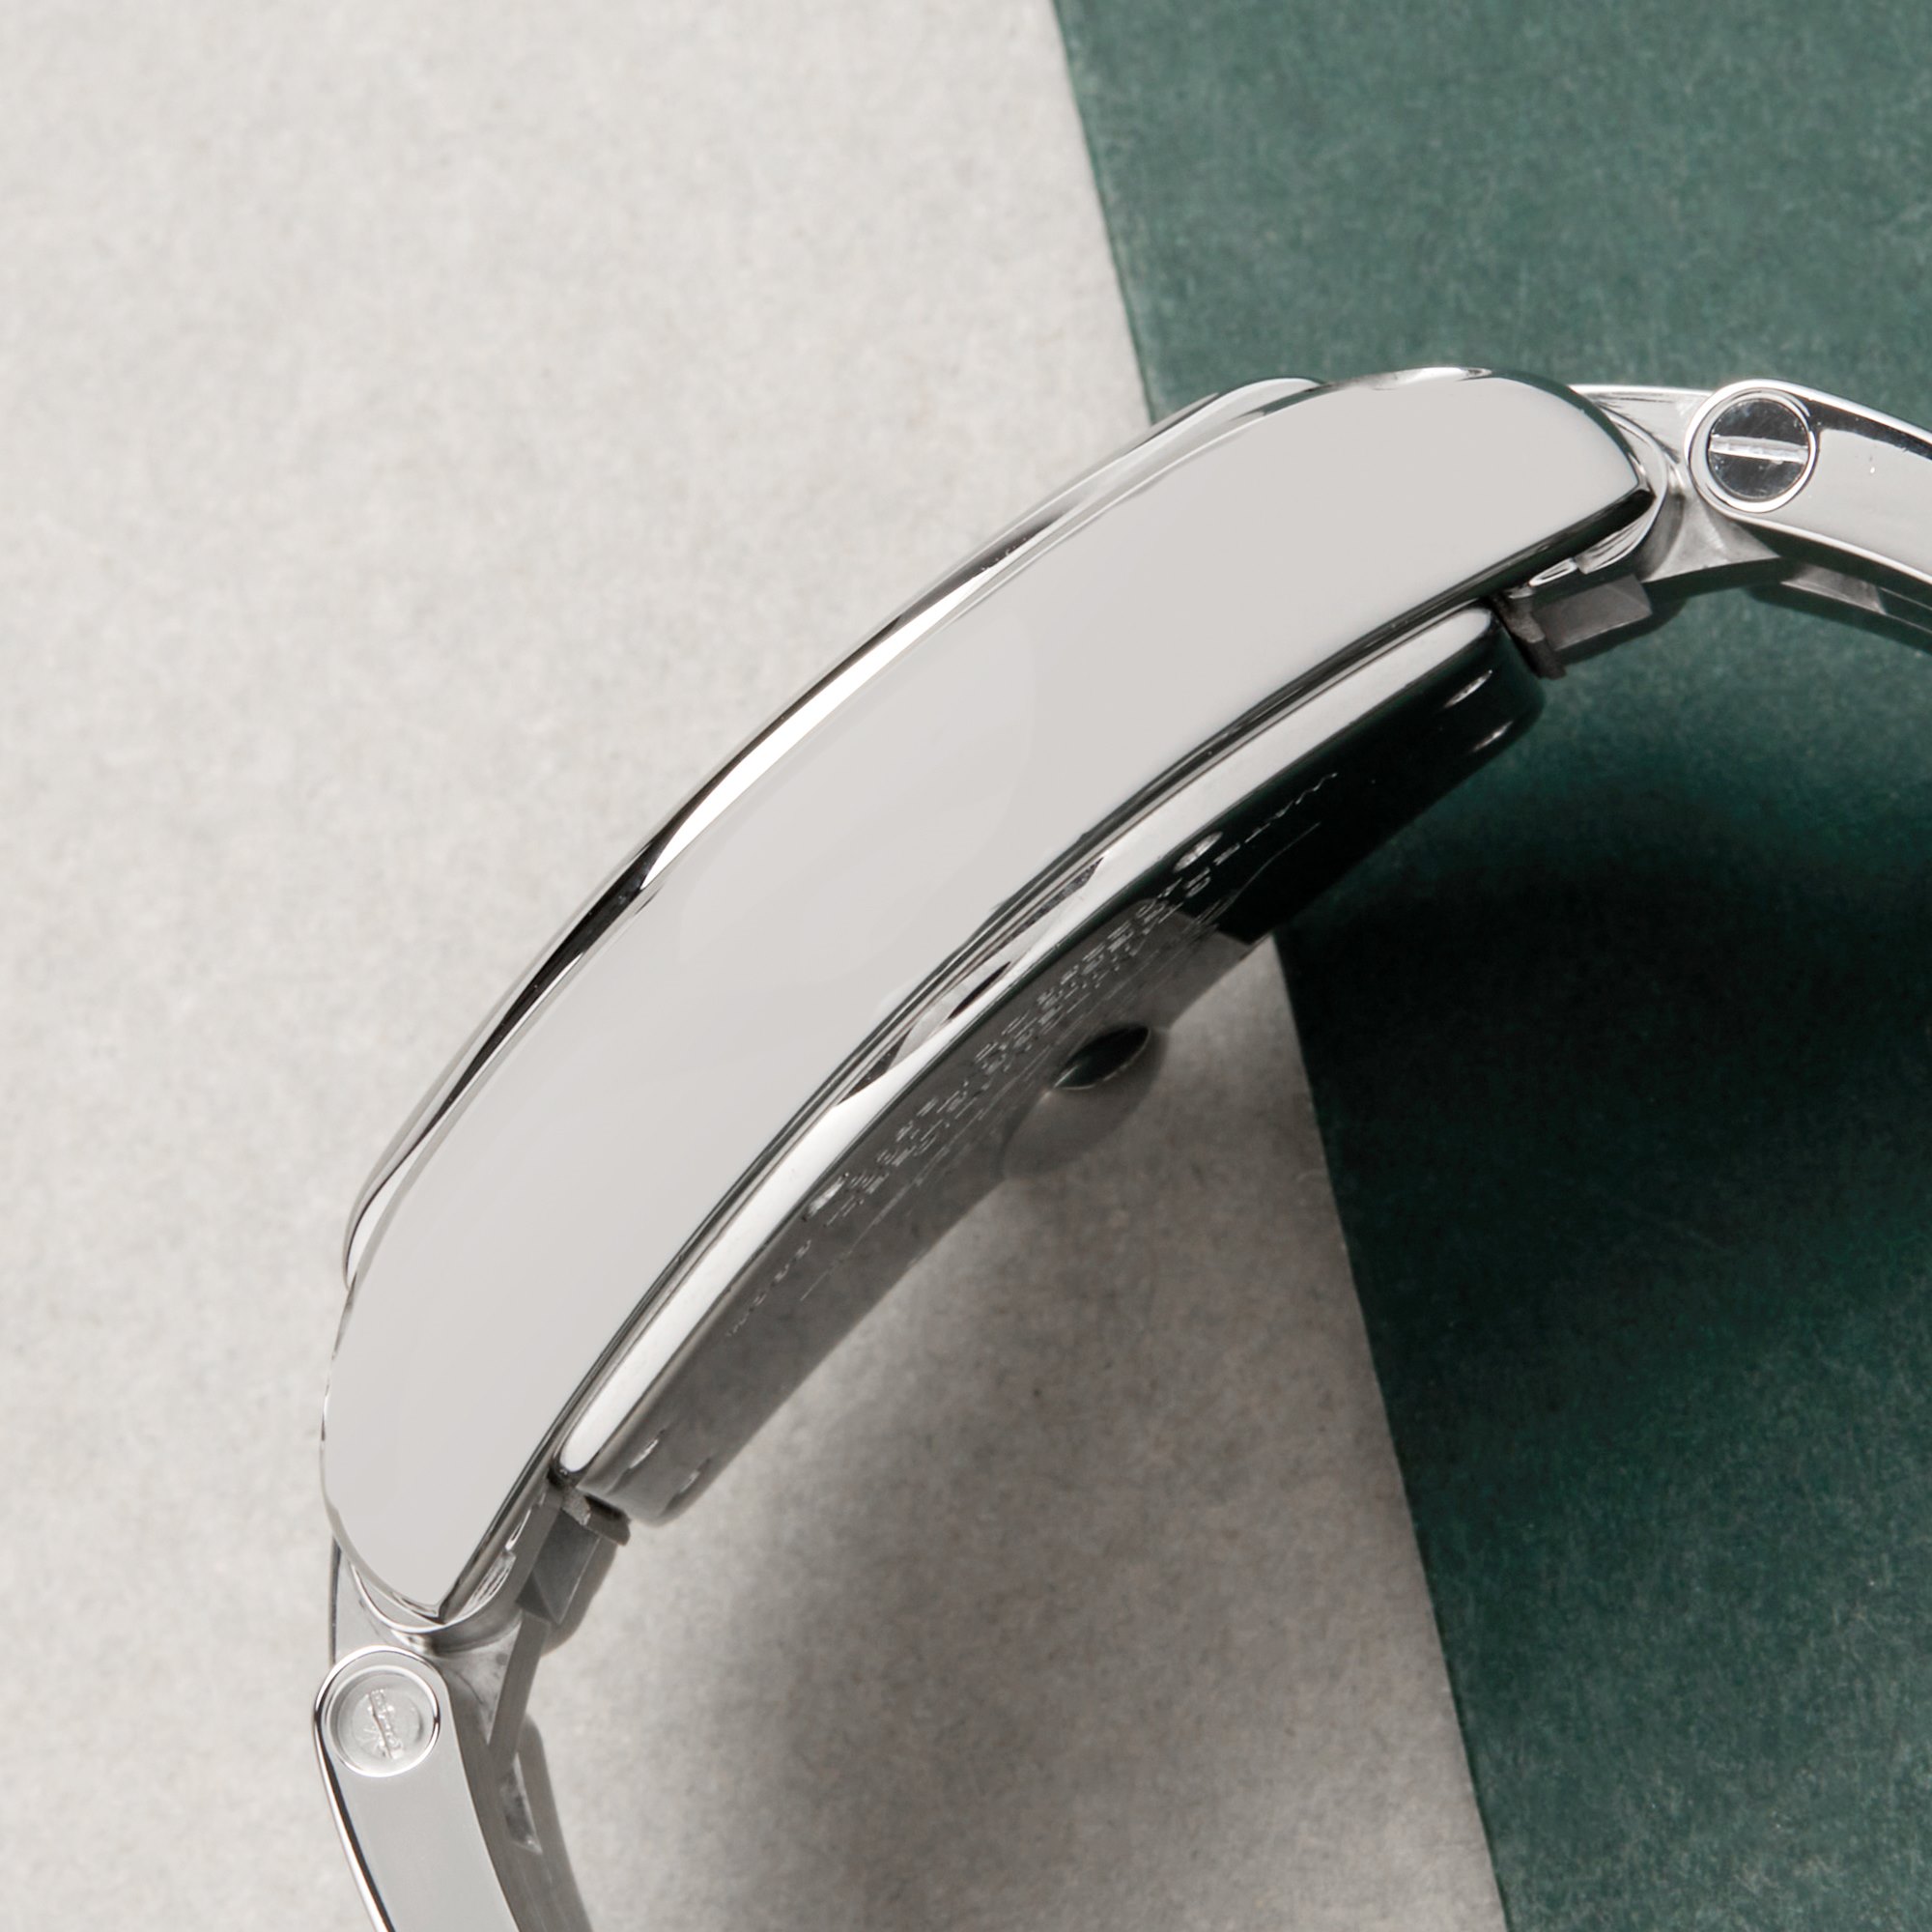 Cartier Roadster Stainless Steel 2510